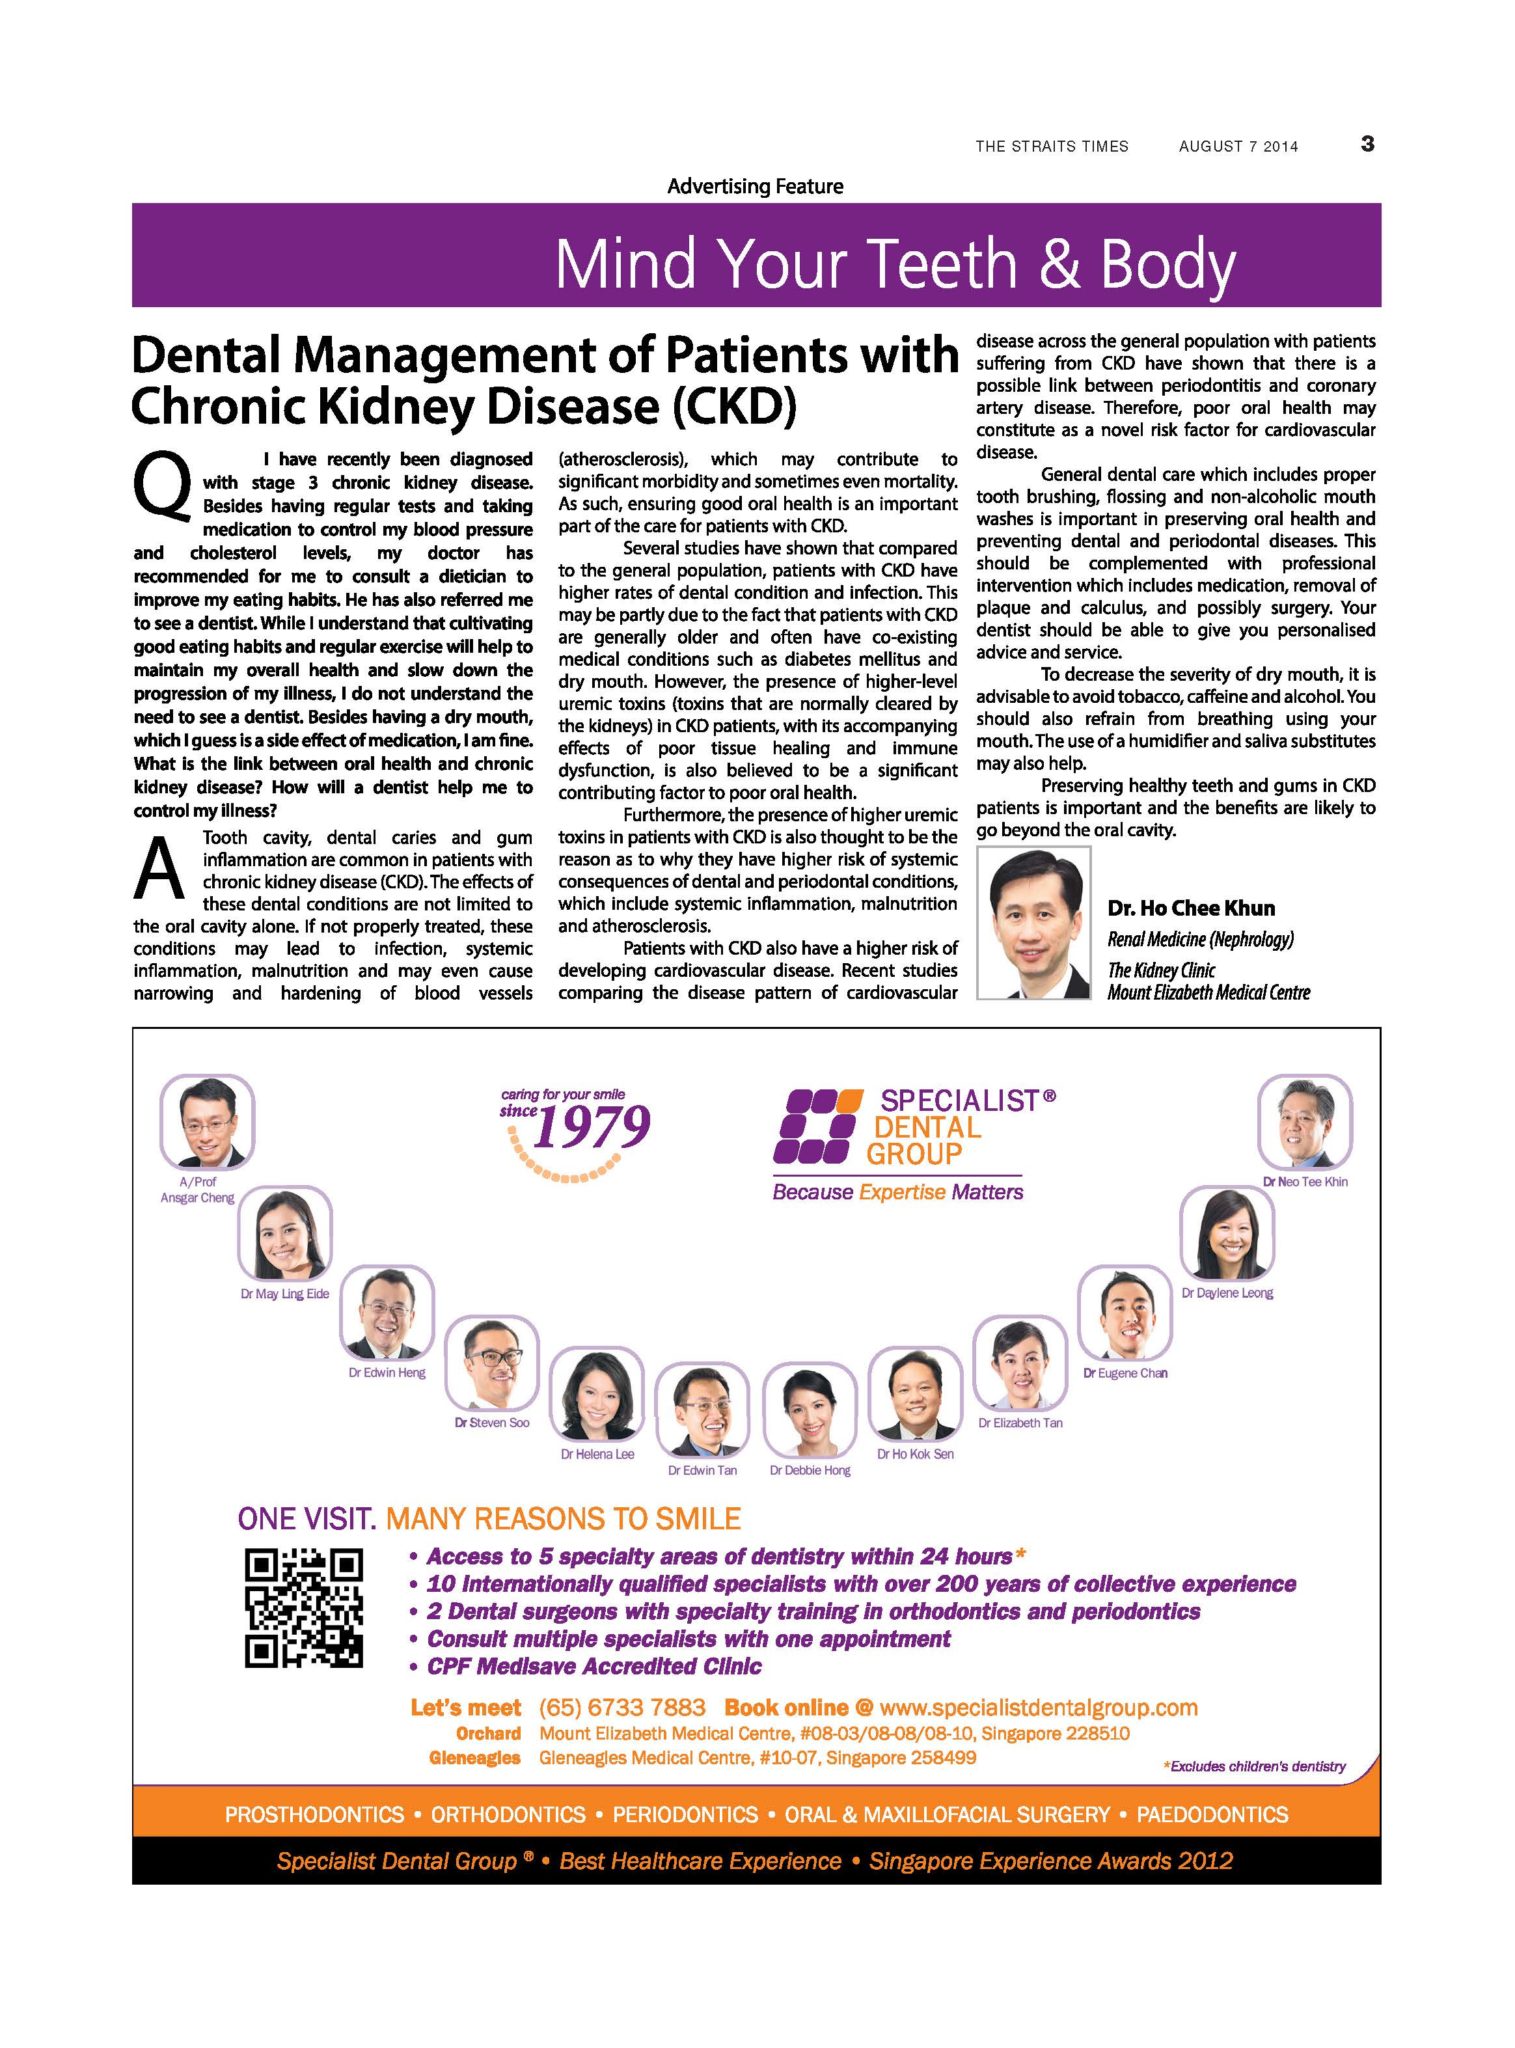 The Straits Times, Mind Your Body, August 7, 2014: “Dental Management of Patients with Chronic Kidney Disease”